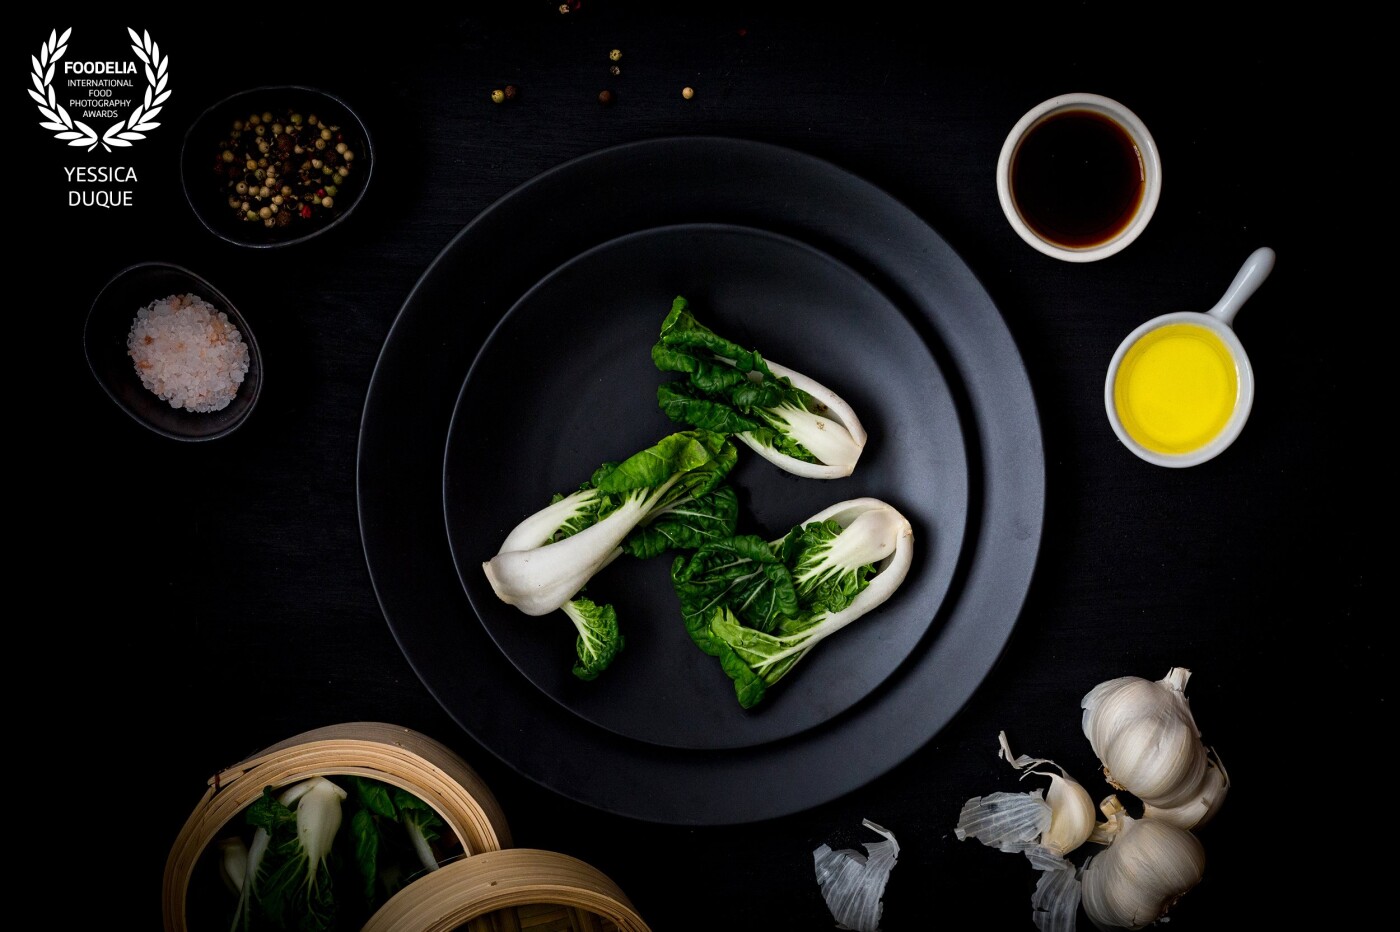 Bok Choi Babies and ingredients.<br />
Let's cook!<br />
Camera: Canon 5D mark iii<br />
Lens: 50 mm <br />
Settings: ISO 1250, 1/200sec at f/10, tripod, daylight